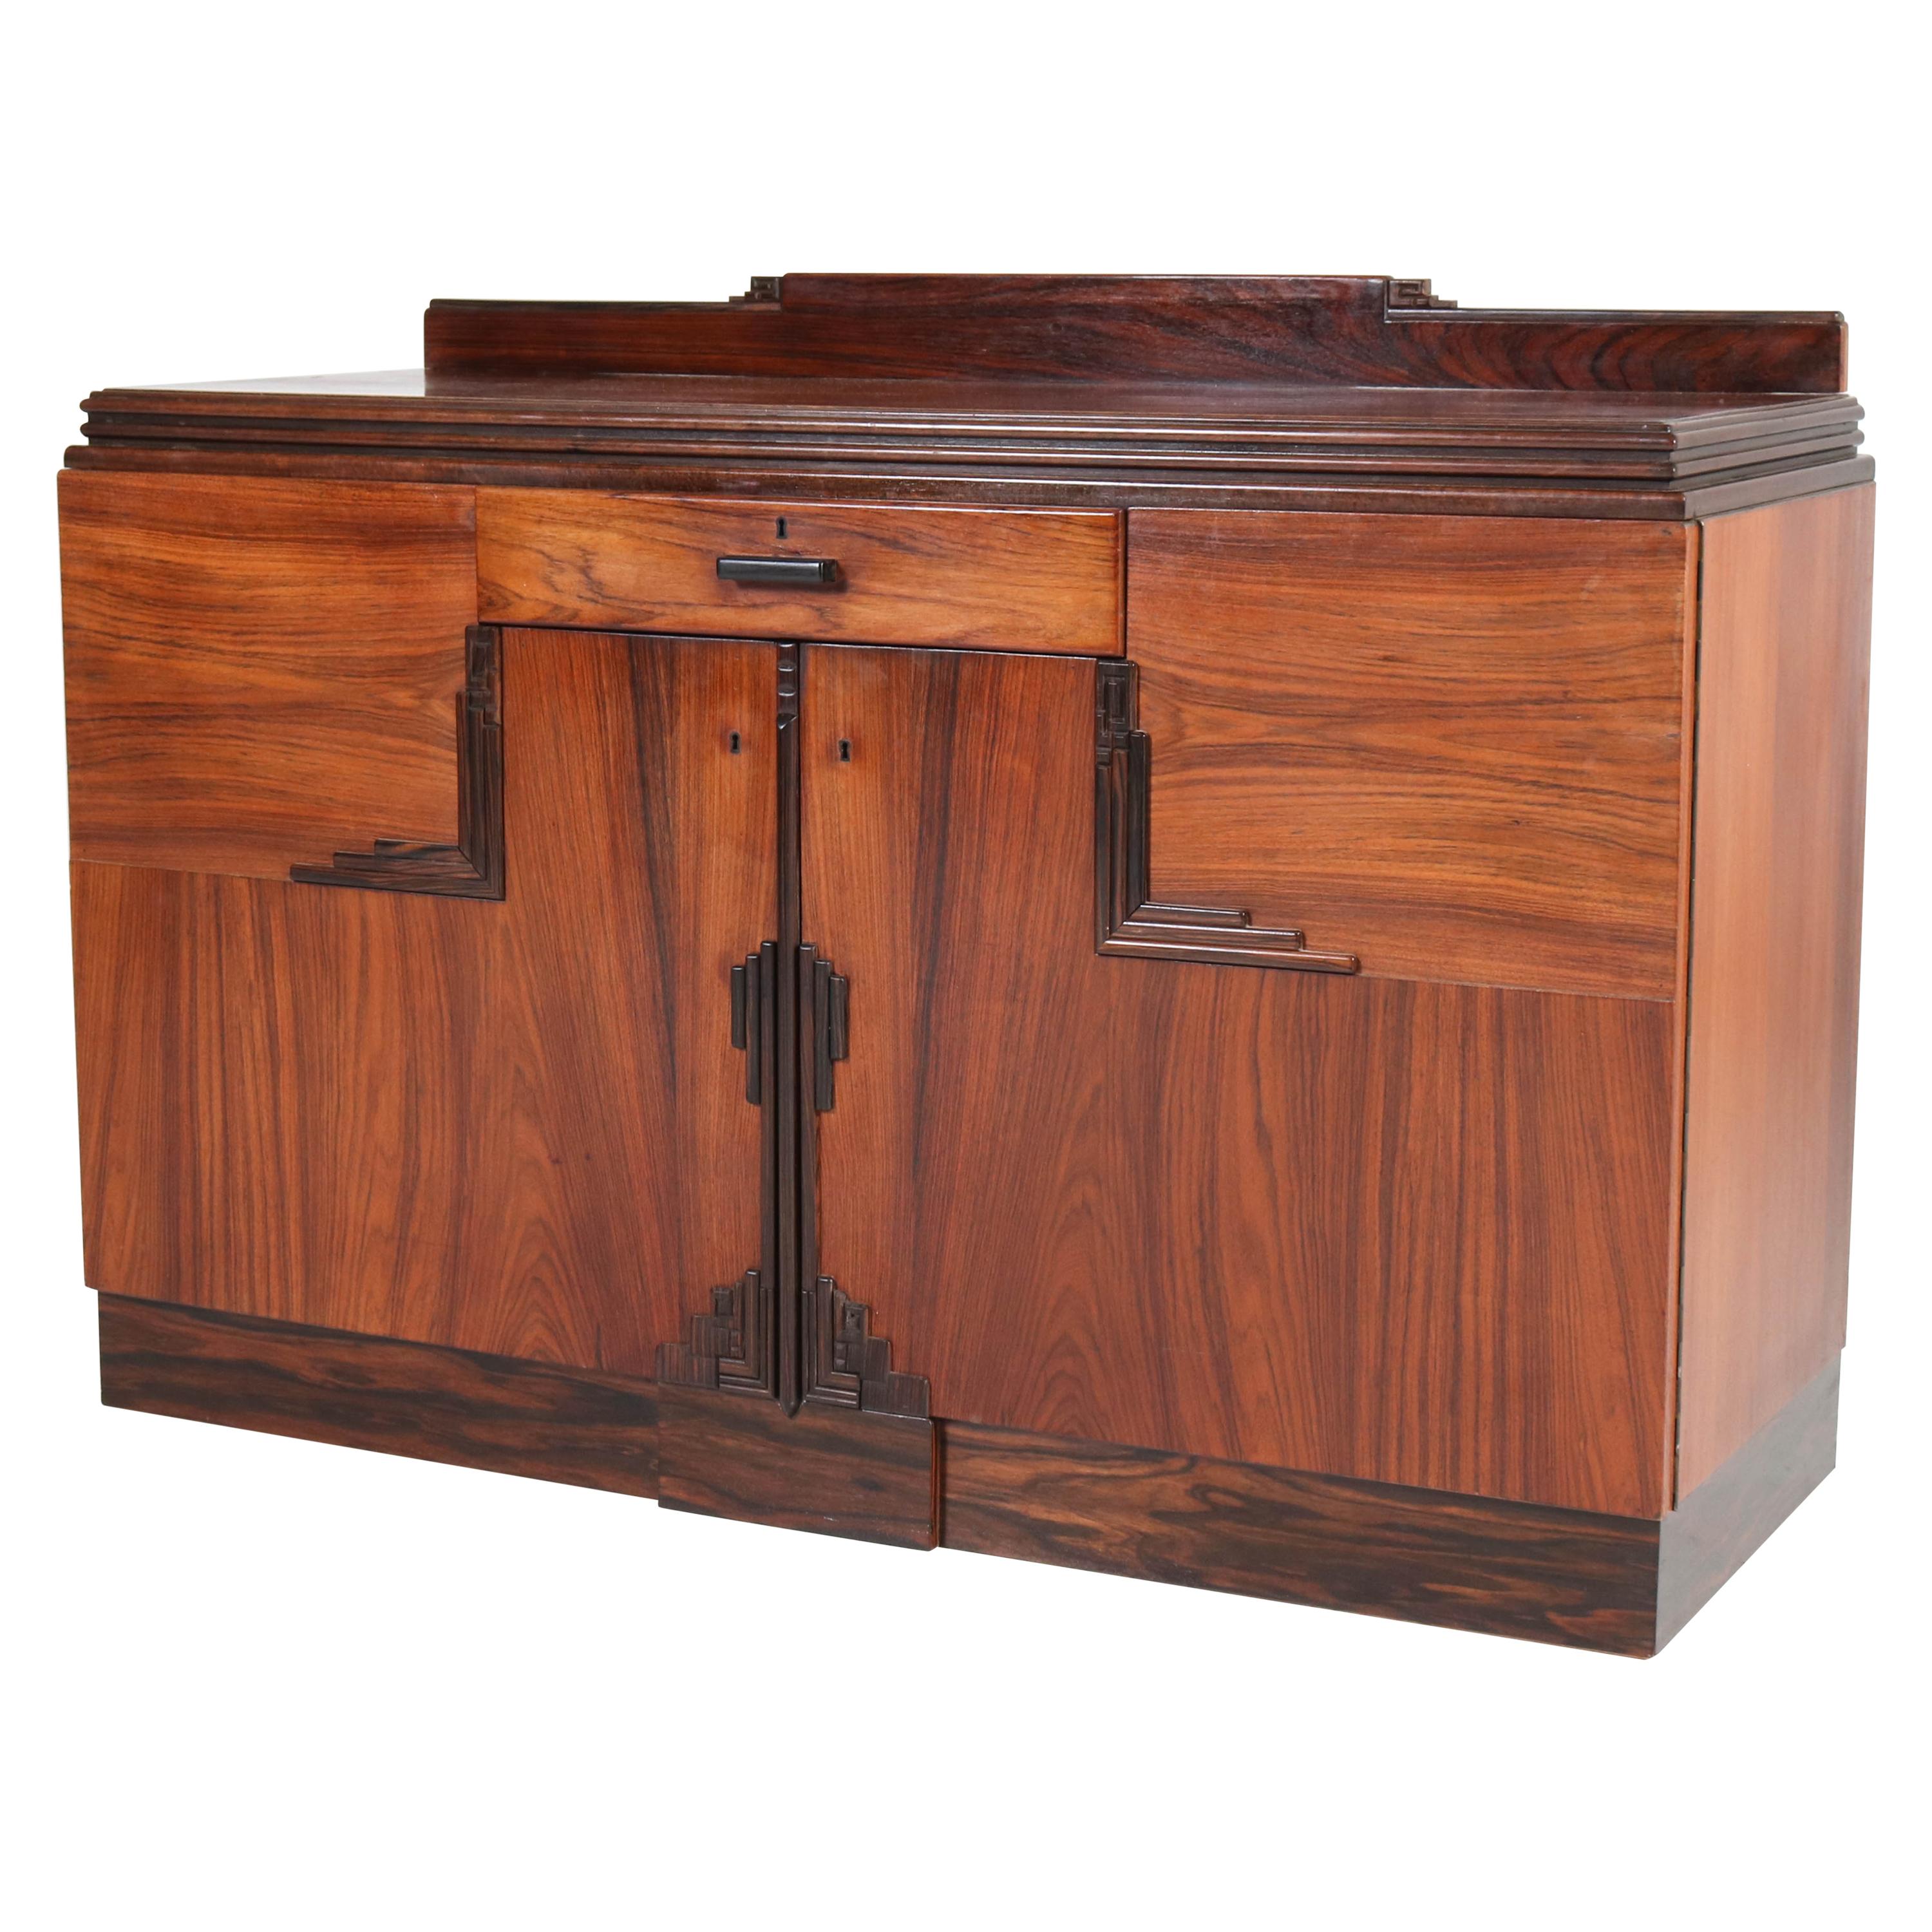 Rosewood Art Deco Amsterdam School Credenza or Sideboard by Fa. Drilling, 1920s